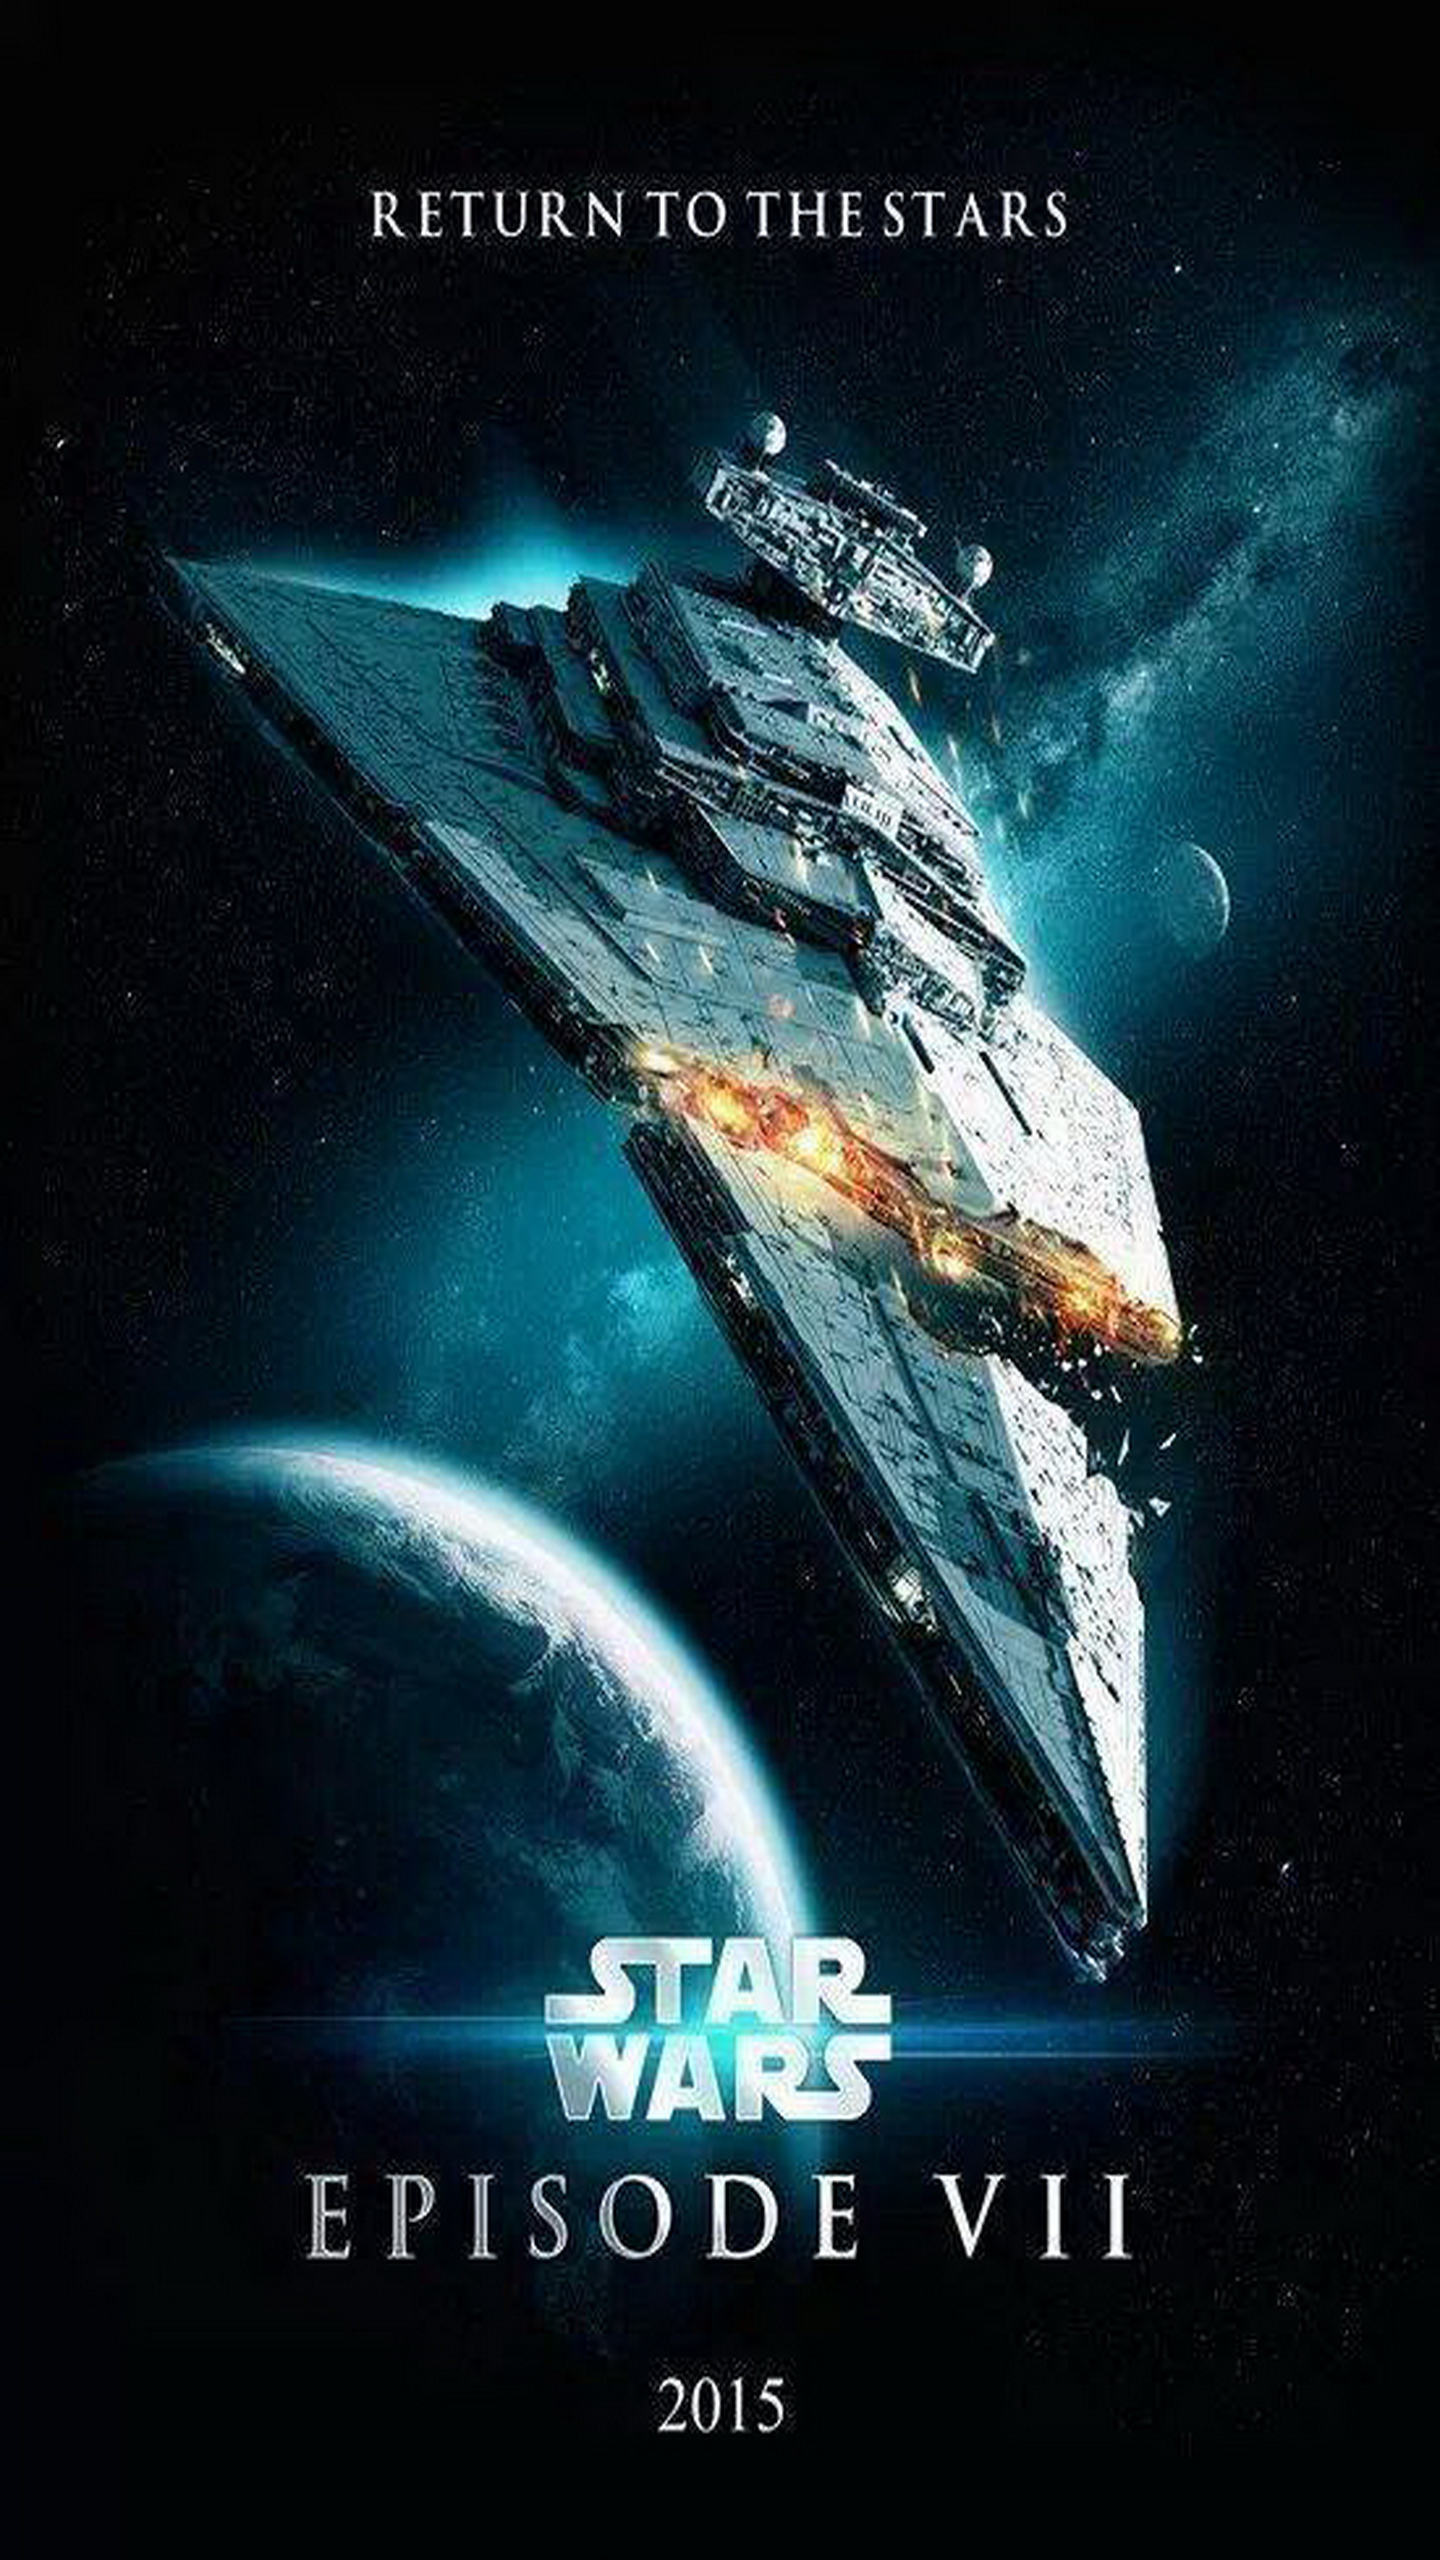  VII The Force Awakens Poster Galaxy Note Wallpaper